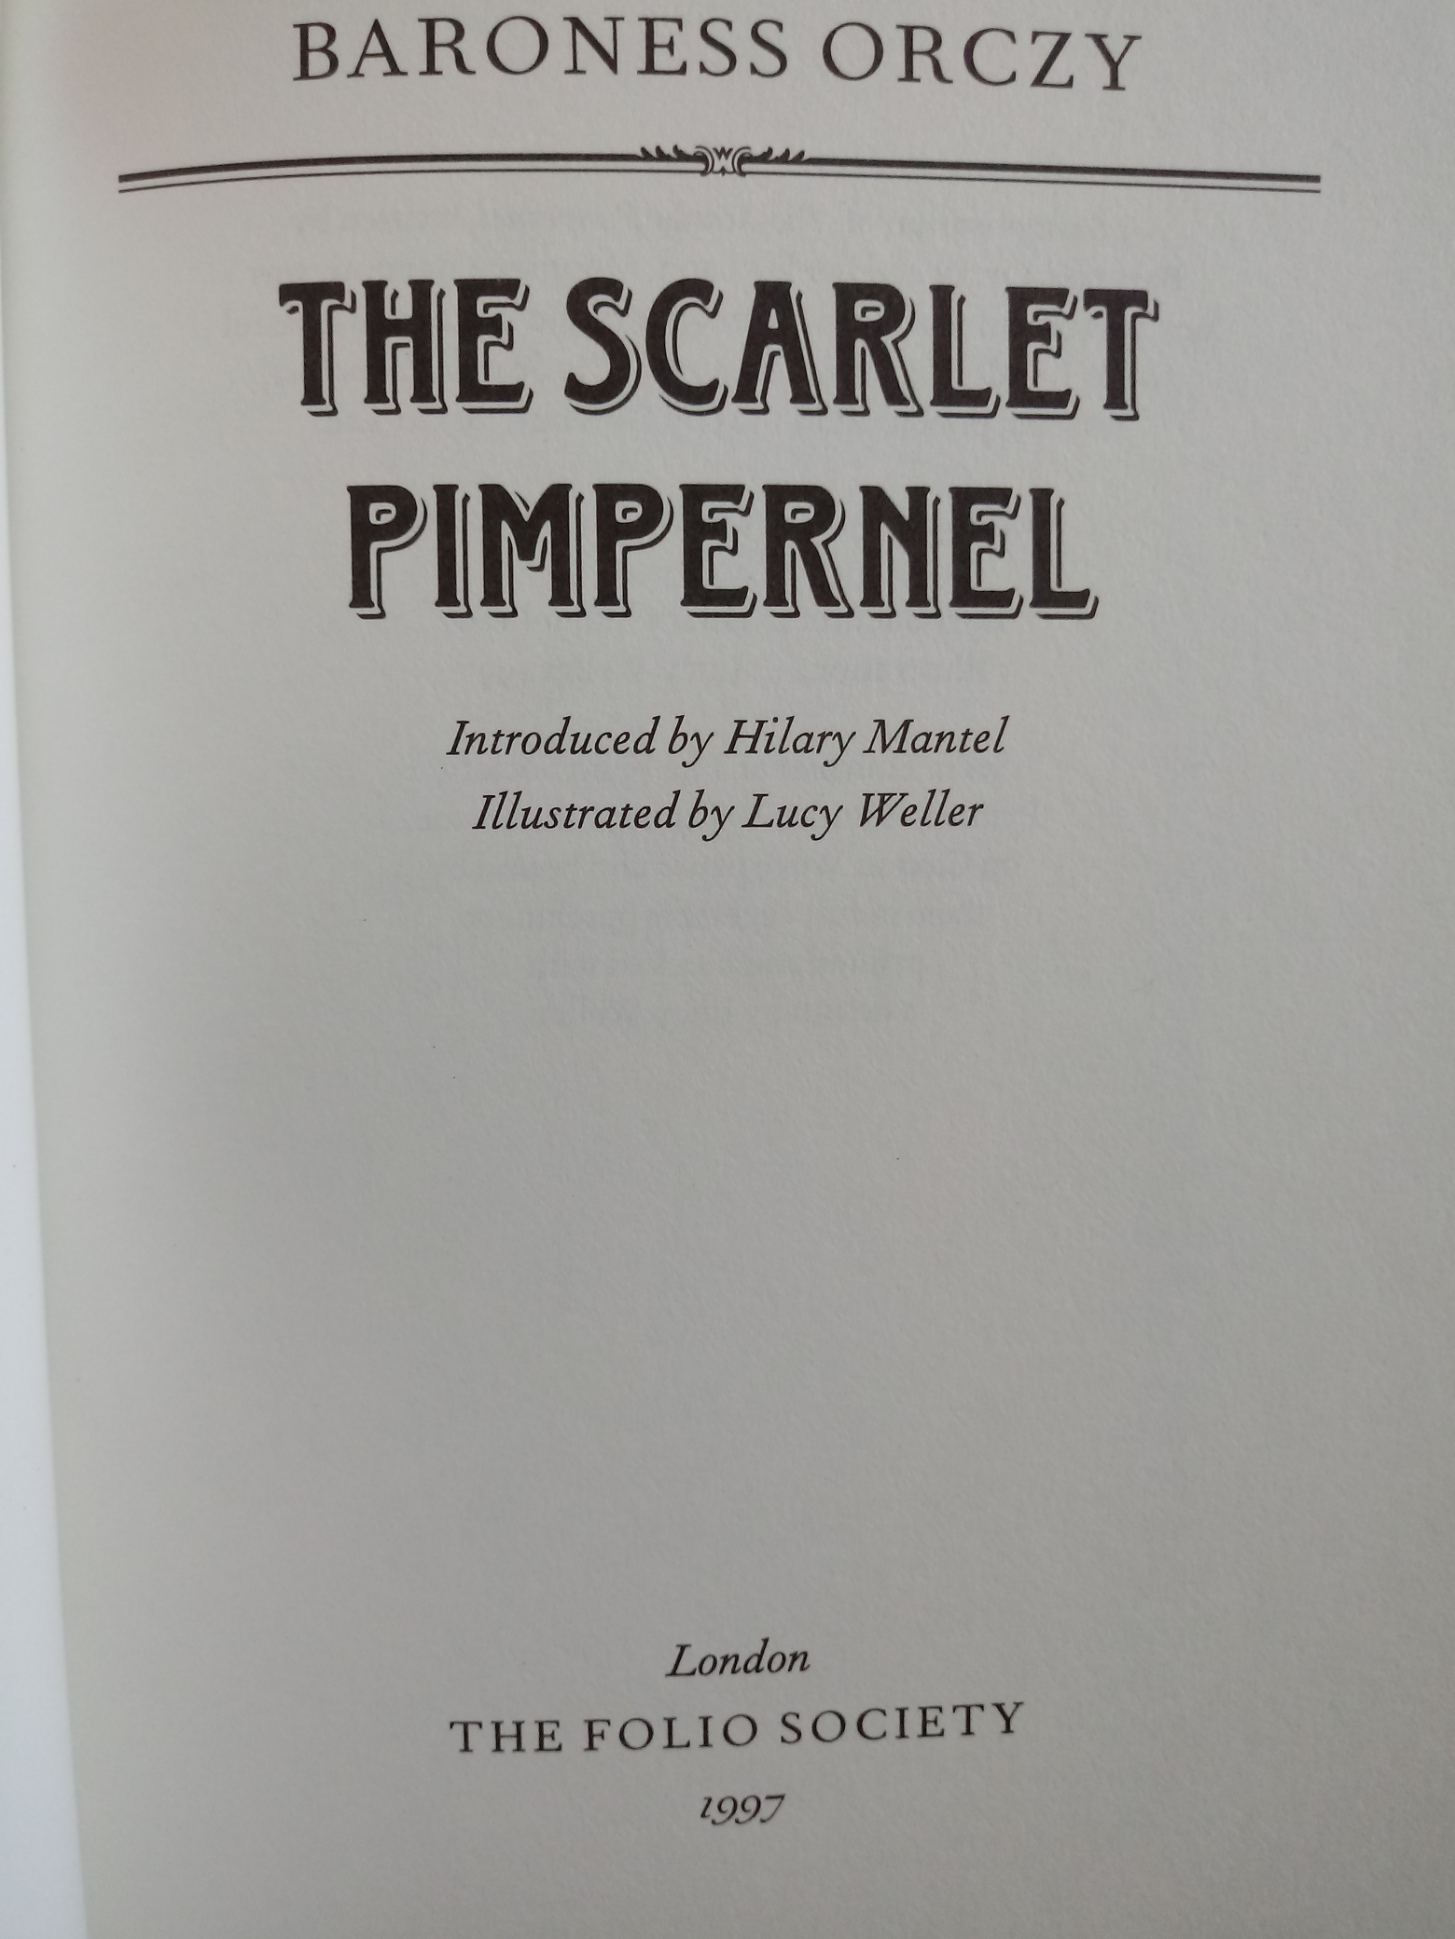 The Scarlet Pimpernel by Baroness Orczy hardback book 253 pages Published 1997 The Folio Society. - Image 3 of 4